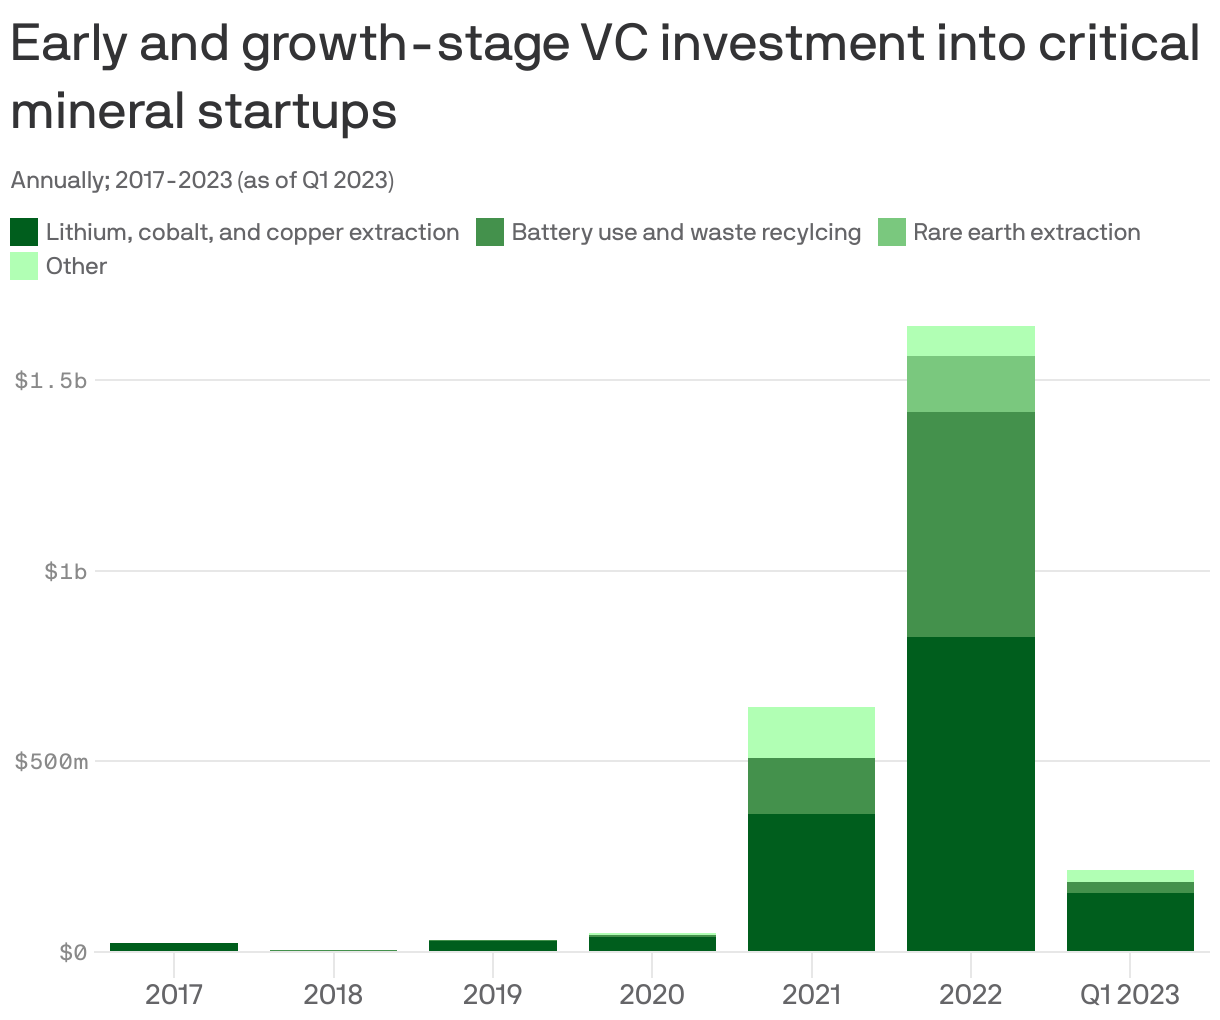 Early and growth-stage VC investment into critical mineral startups